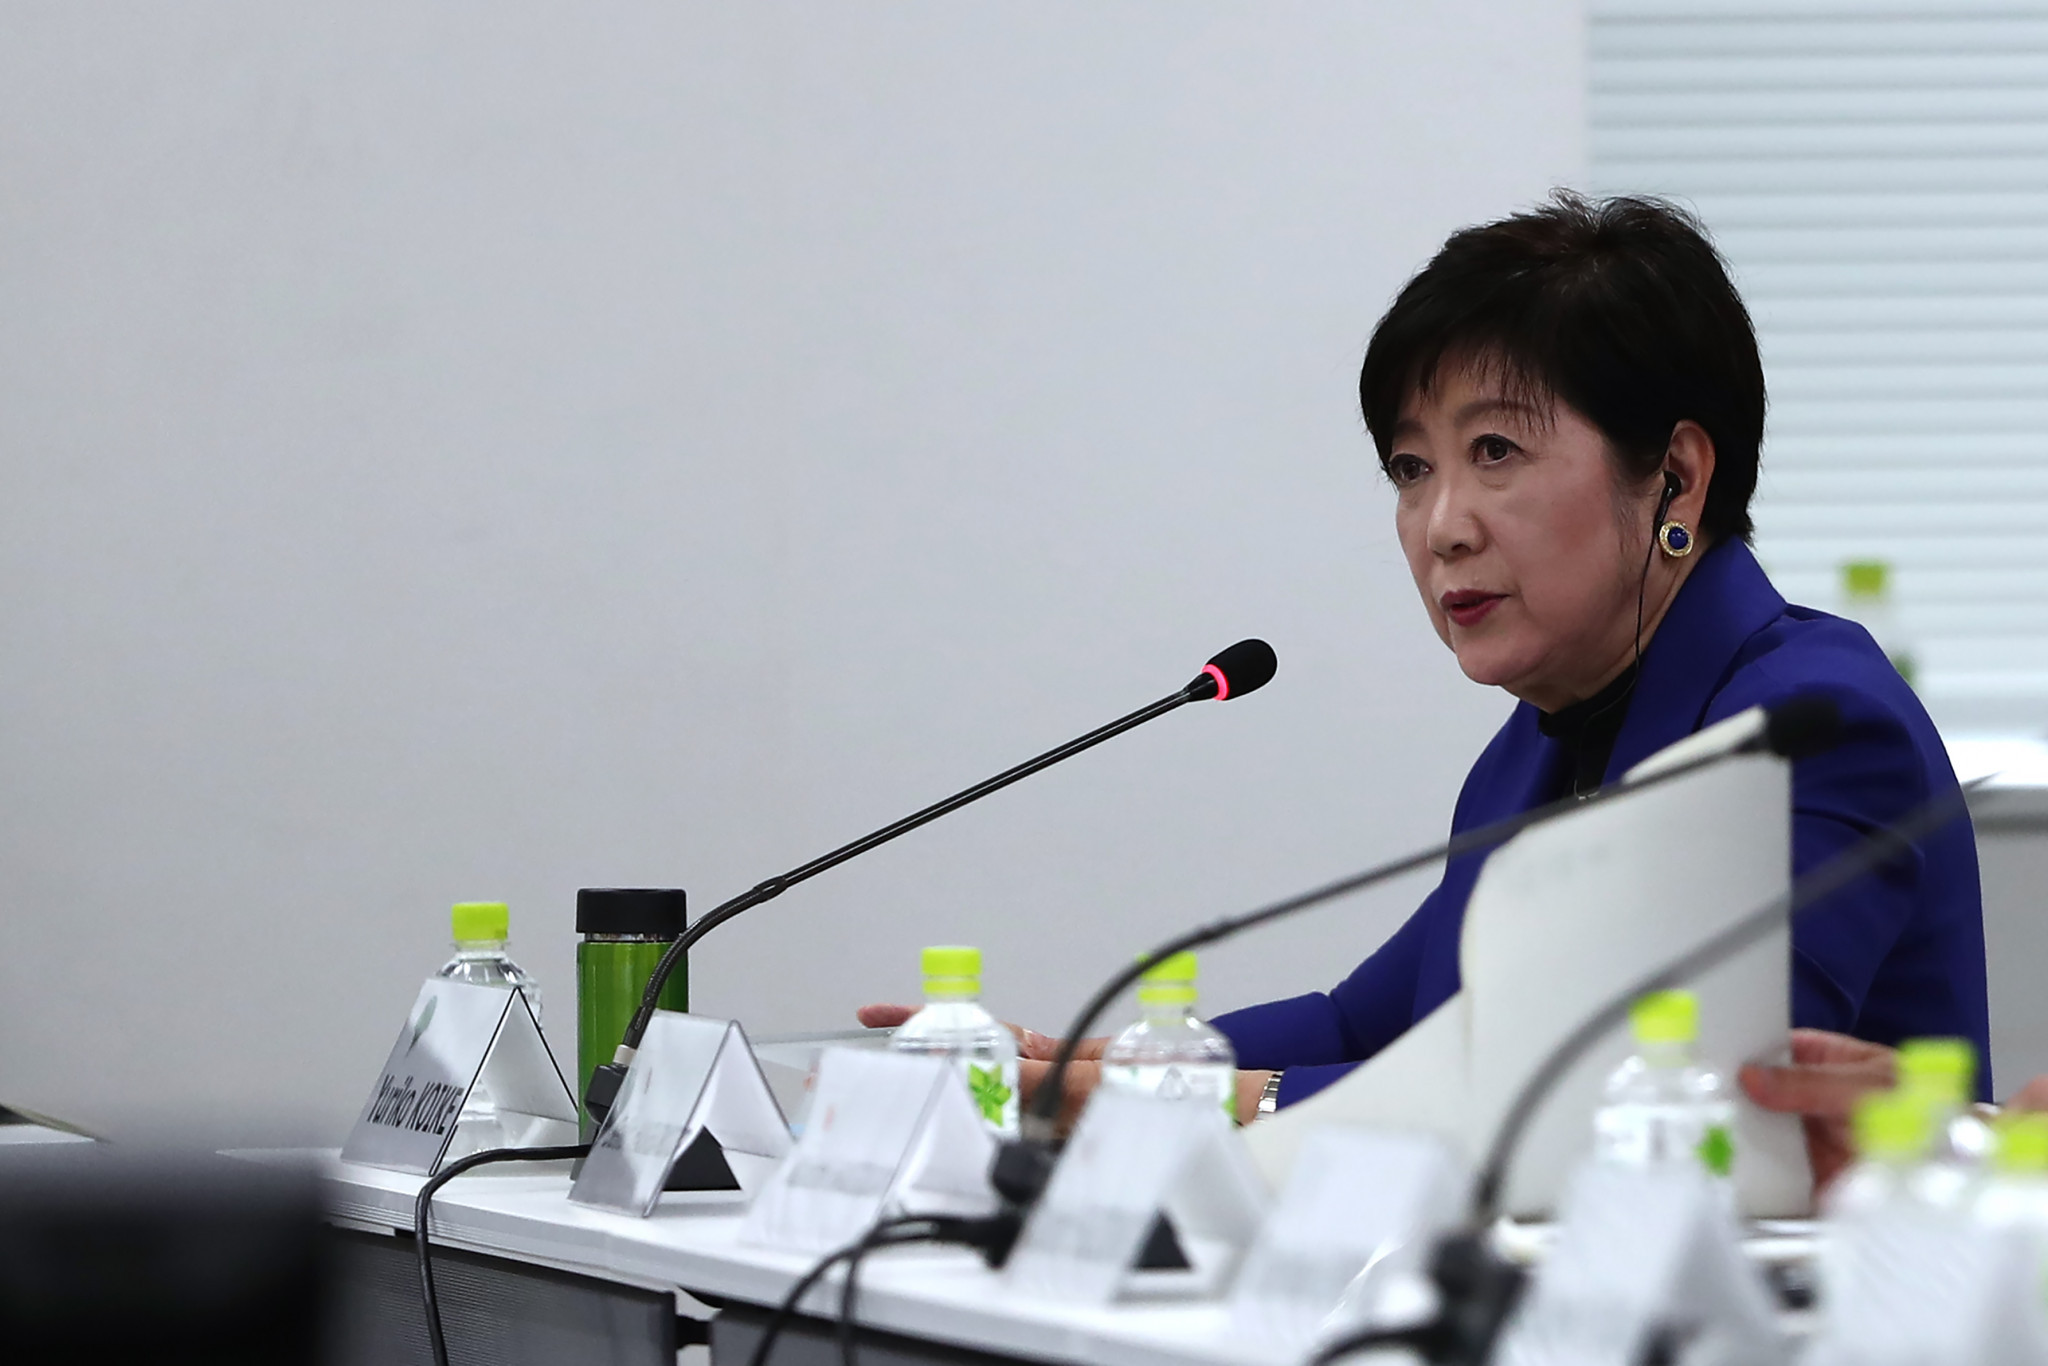 Tokyo Governor Yuriko Koike criticised the IOC's "unprecedented" decision to move the marathon and race walk events out of the Japanese capital to Sapporo ©Getty Images